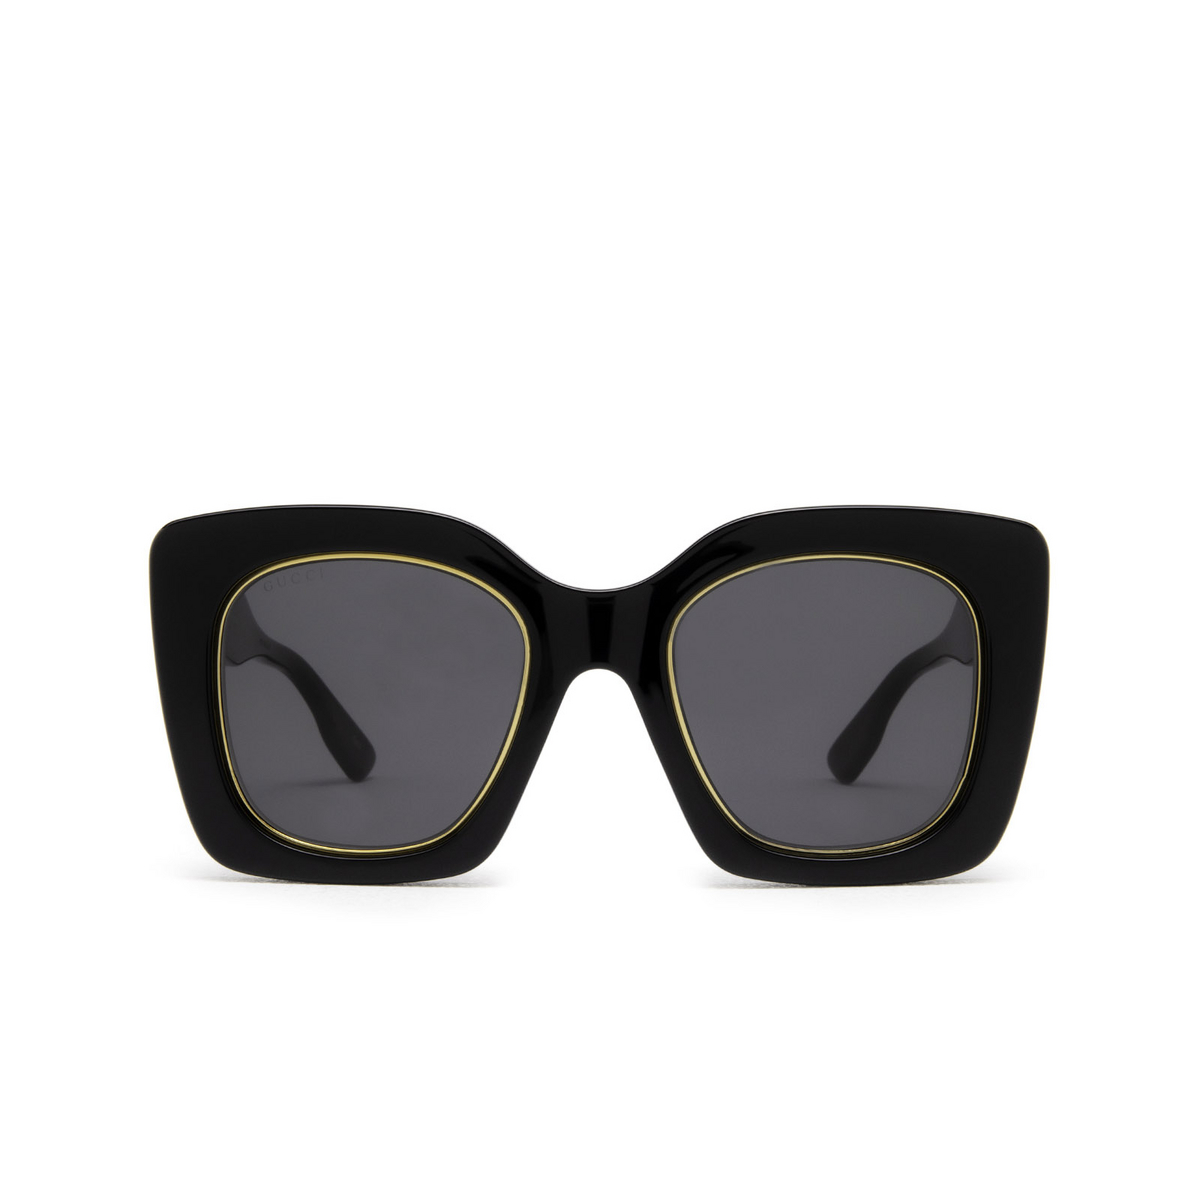 Gucci® Butterfly Sunglasses: GG1151S color Black 001 - front view.